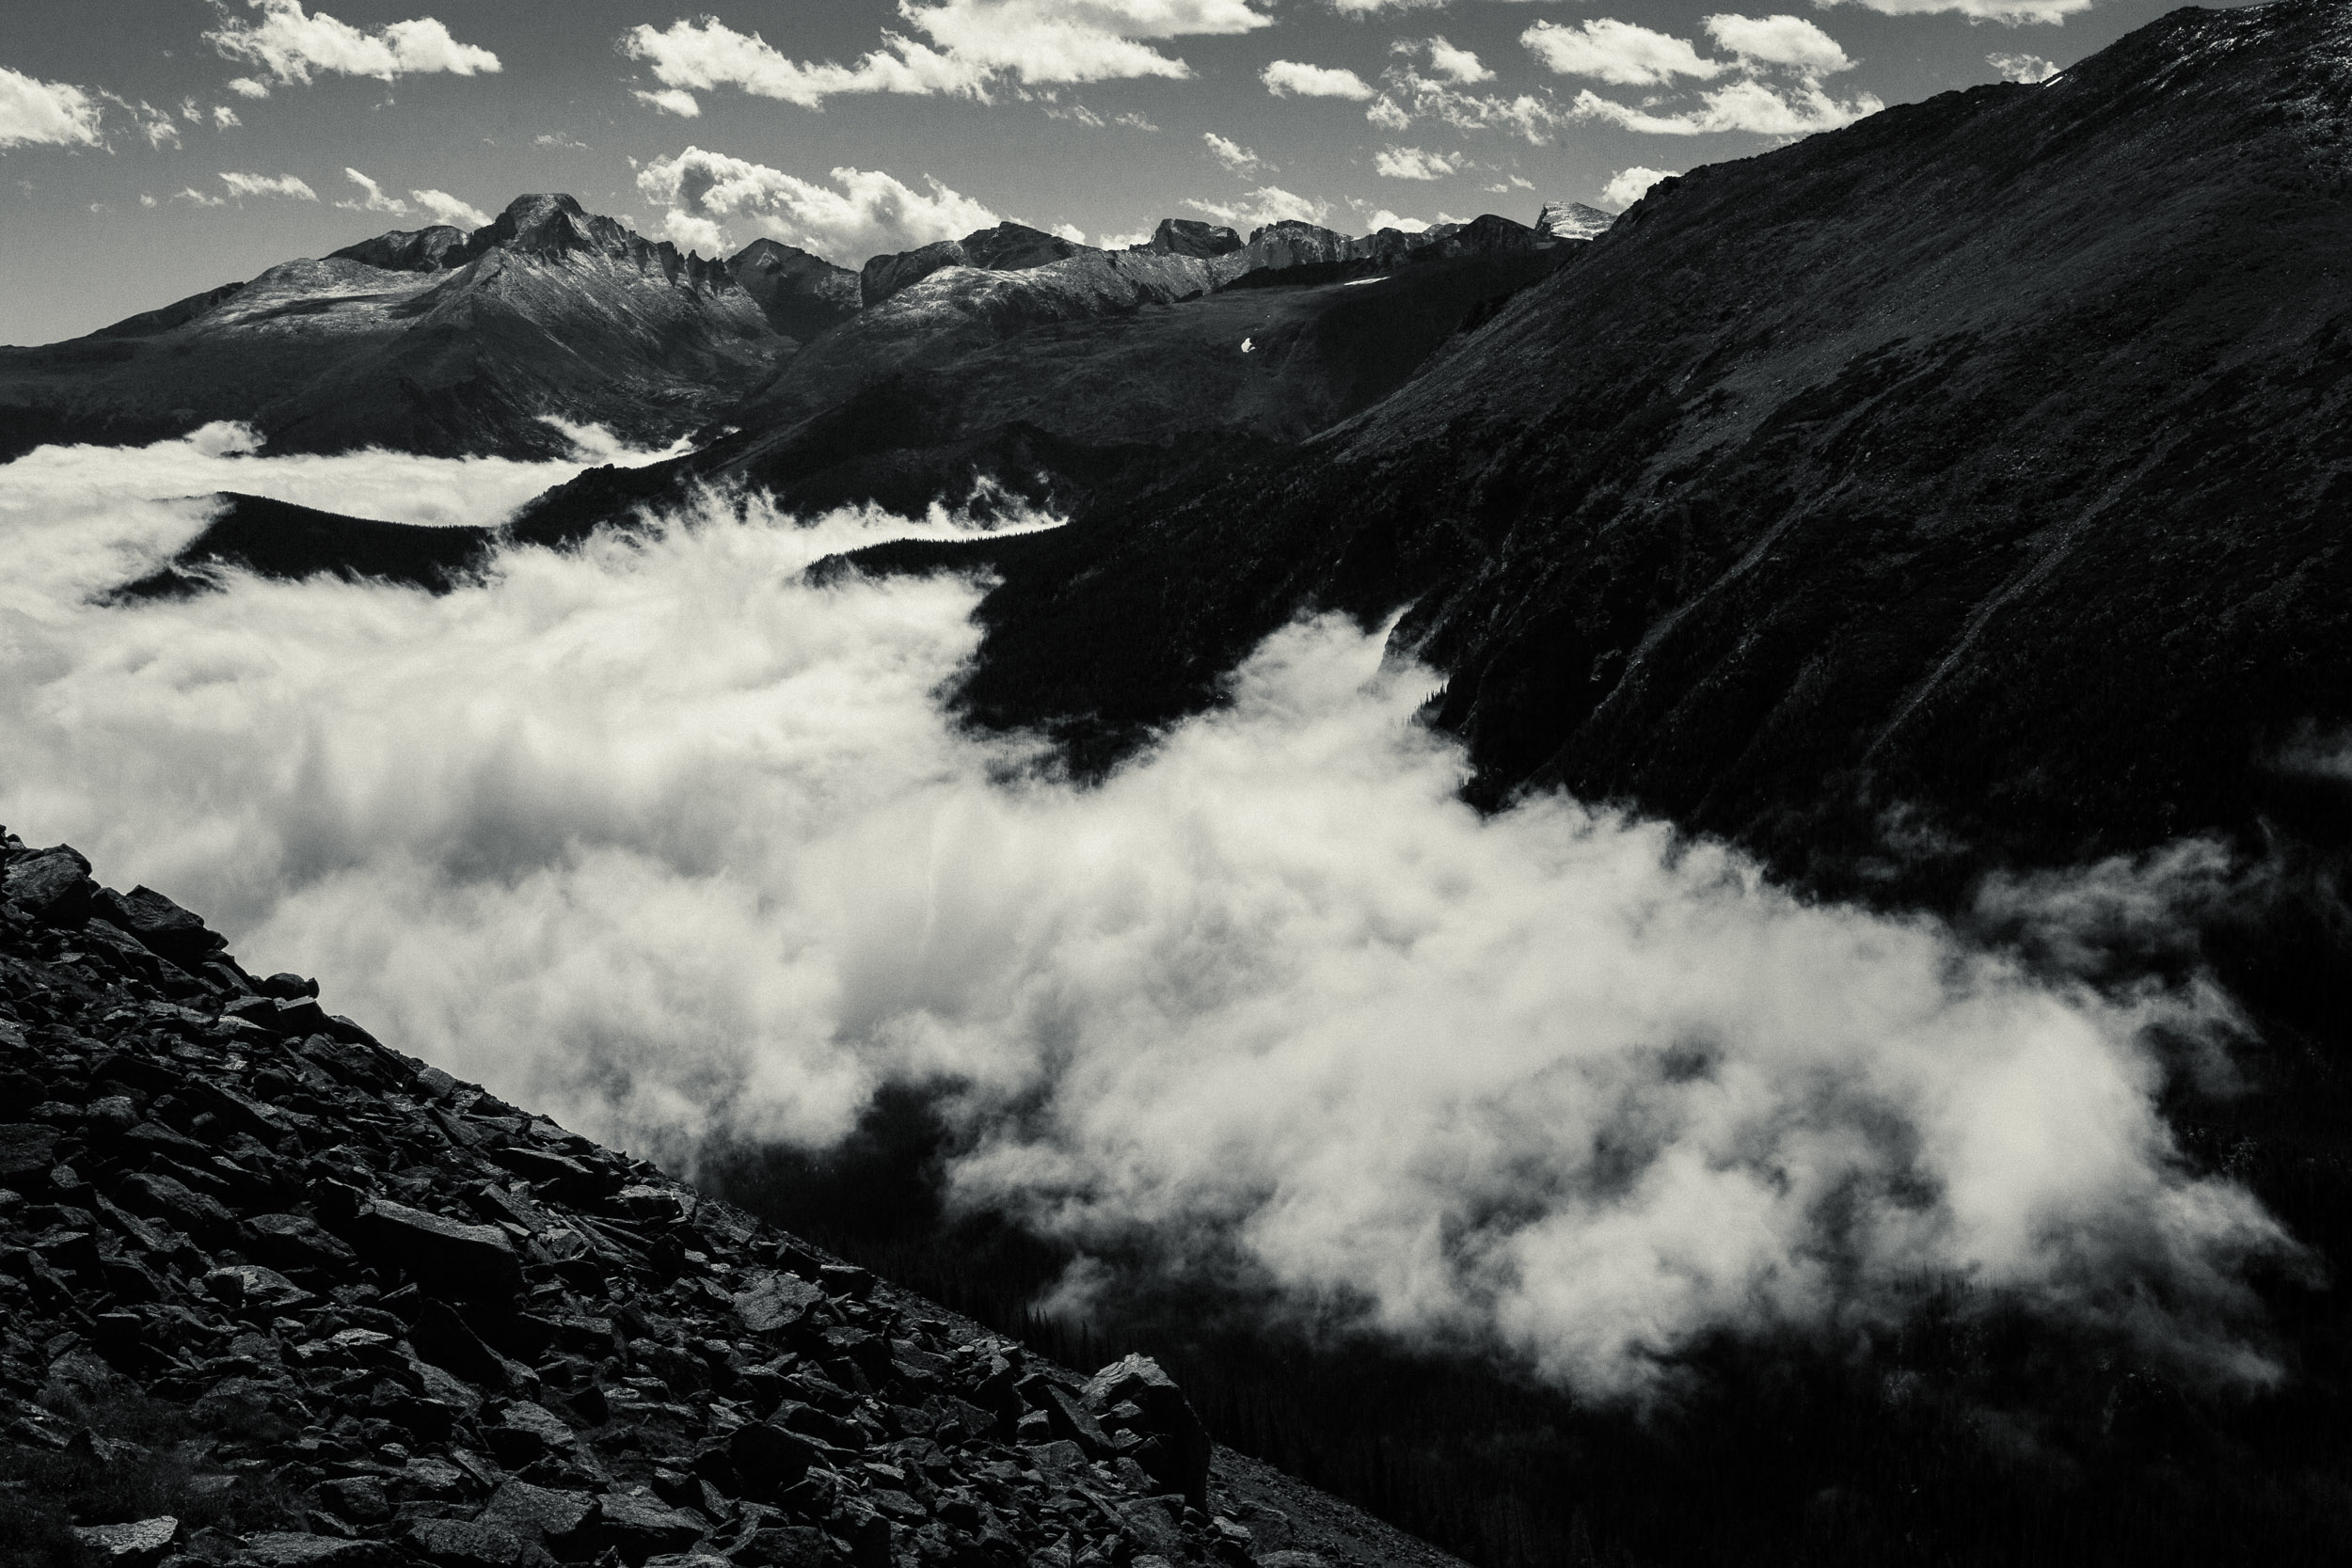 Clouds float amid the valleys in Rocky Mountain National Park